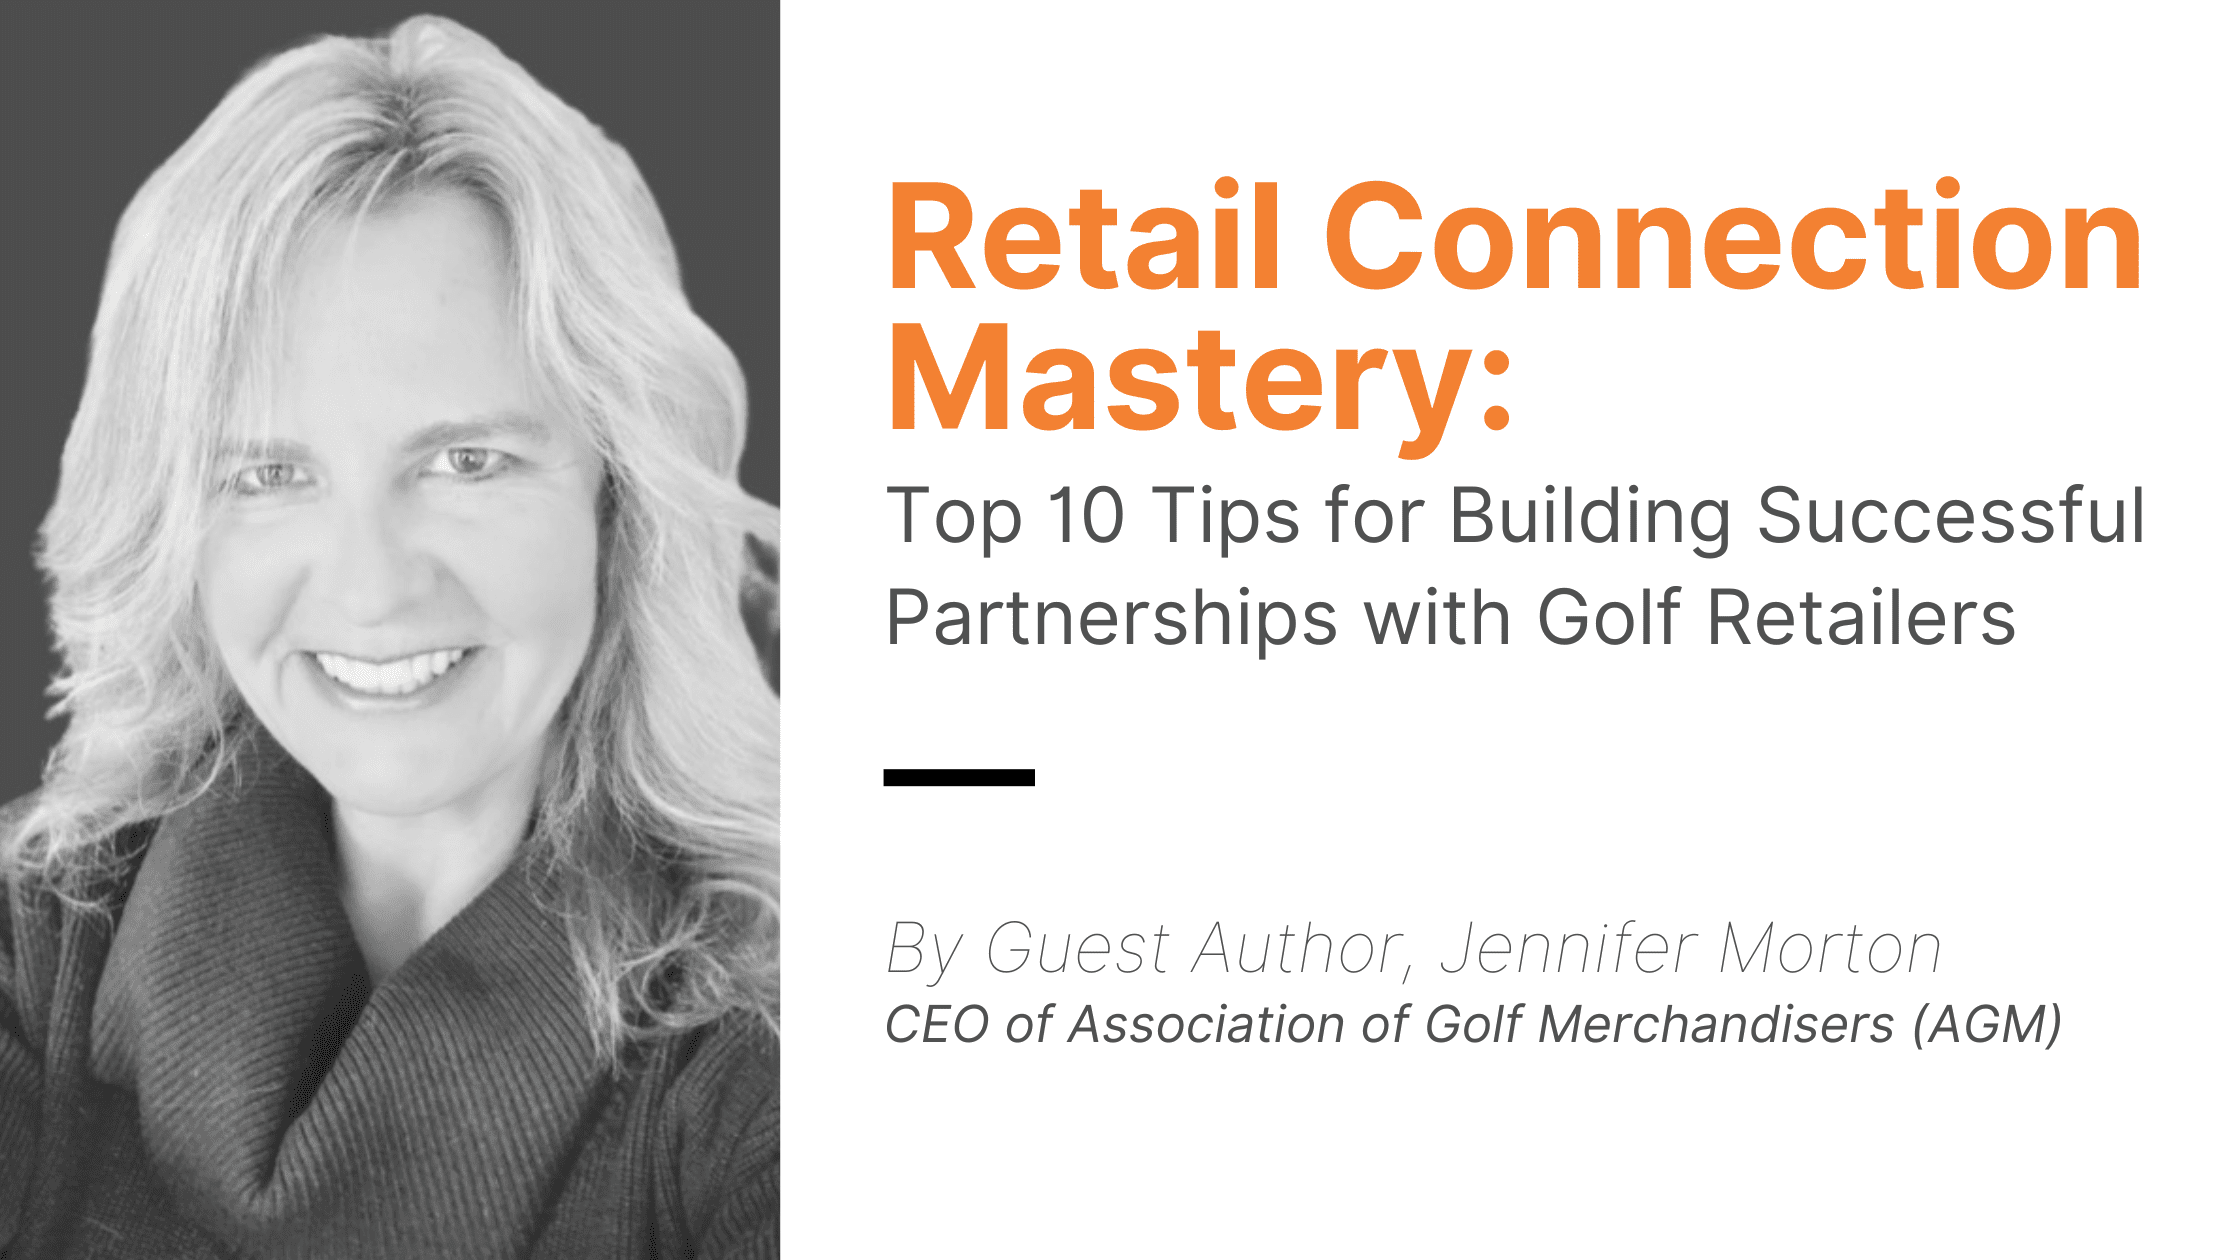 Retail Connection Mastery: Top 10 Tips for Building Successful Partnerships with Golf Retailers